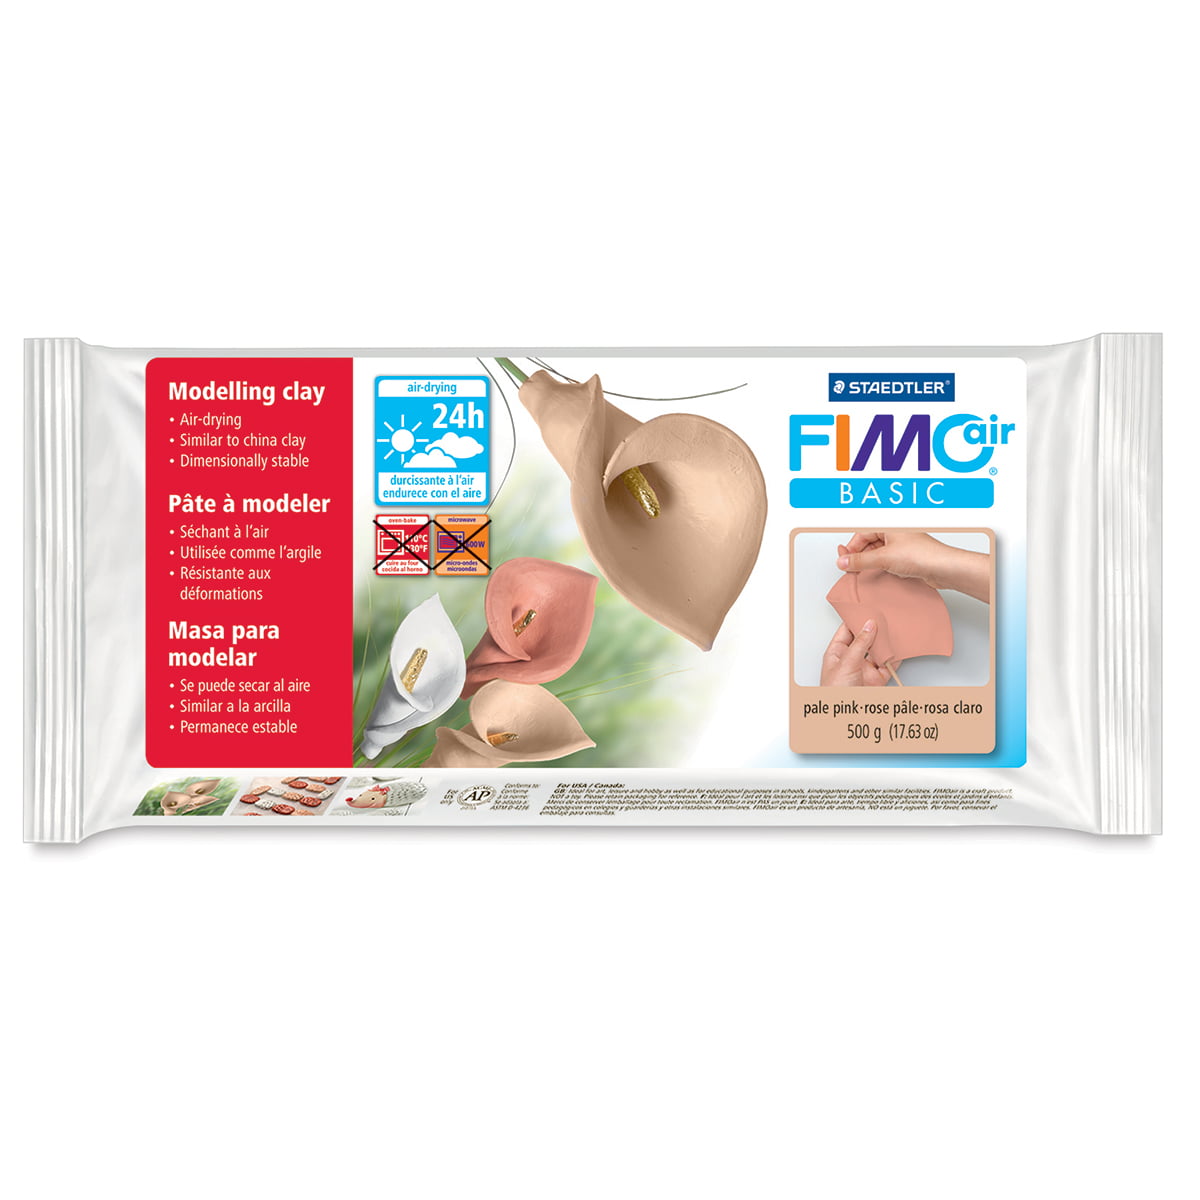 Staedtler Fimo Air Basic Modeling Clay - 17.6 oz, Pale Pink 